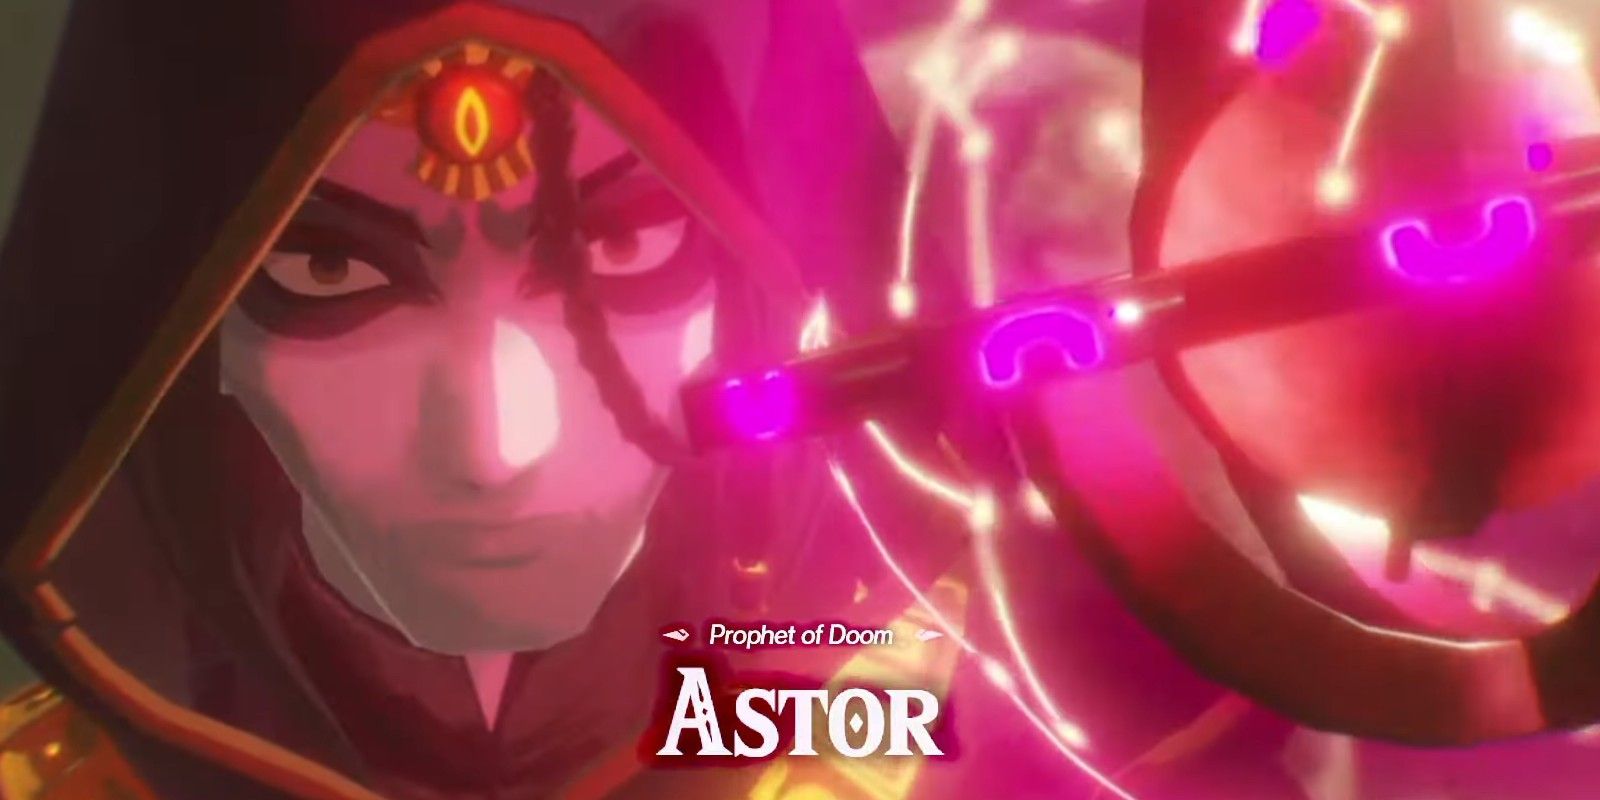 Legend of Zelda - Age of Calamity: The Prophet Astor who saw The Rise of Calamity Ganon